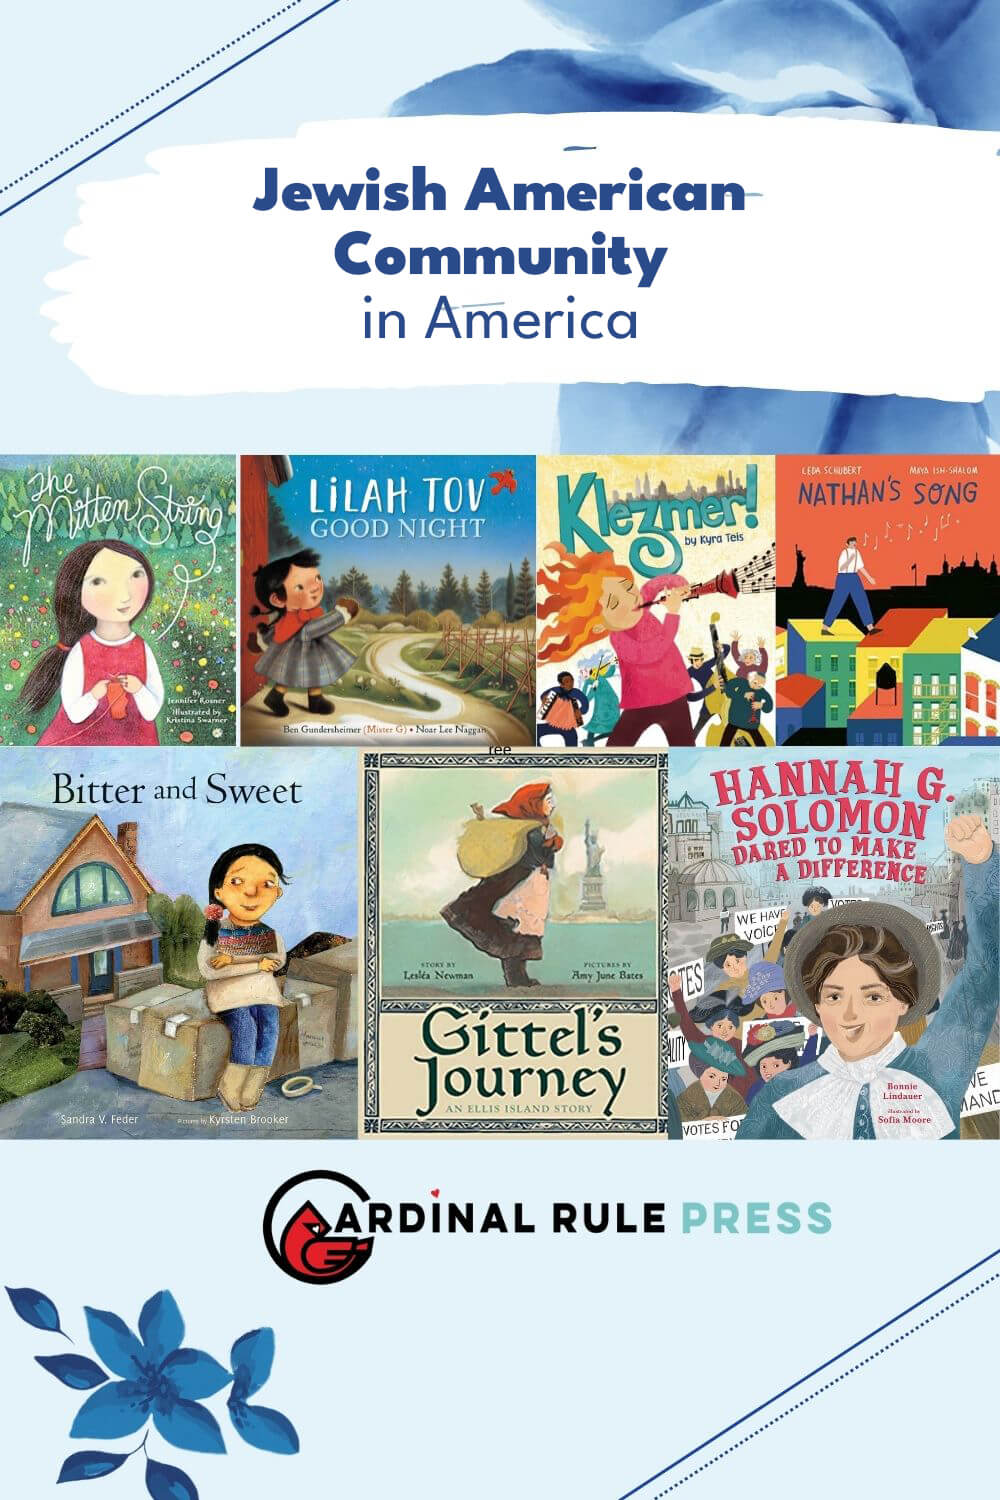 Jewish American in America. May is Jewish American Heritage Month and it’s a time to recognize the history of Jewish contributions to American culture. #BooksToRead #PictureBooks #ChildrensBooks #JewishAmericanBooks